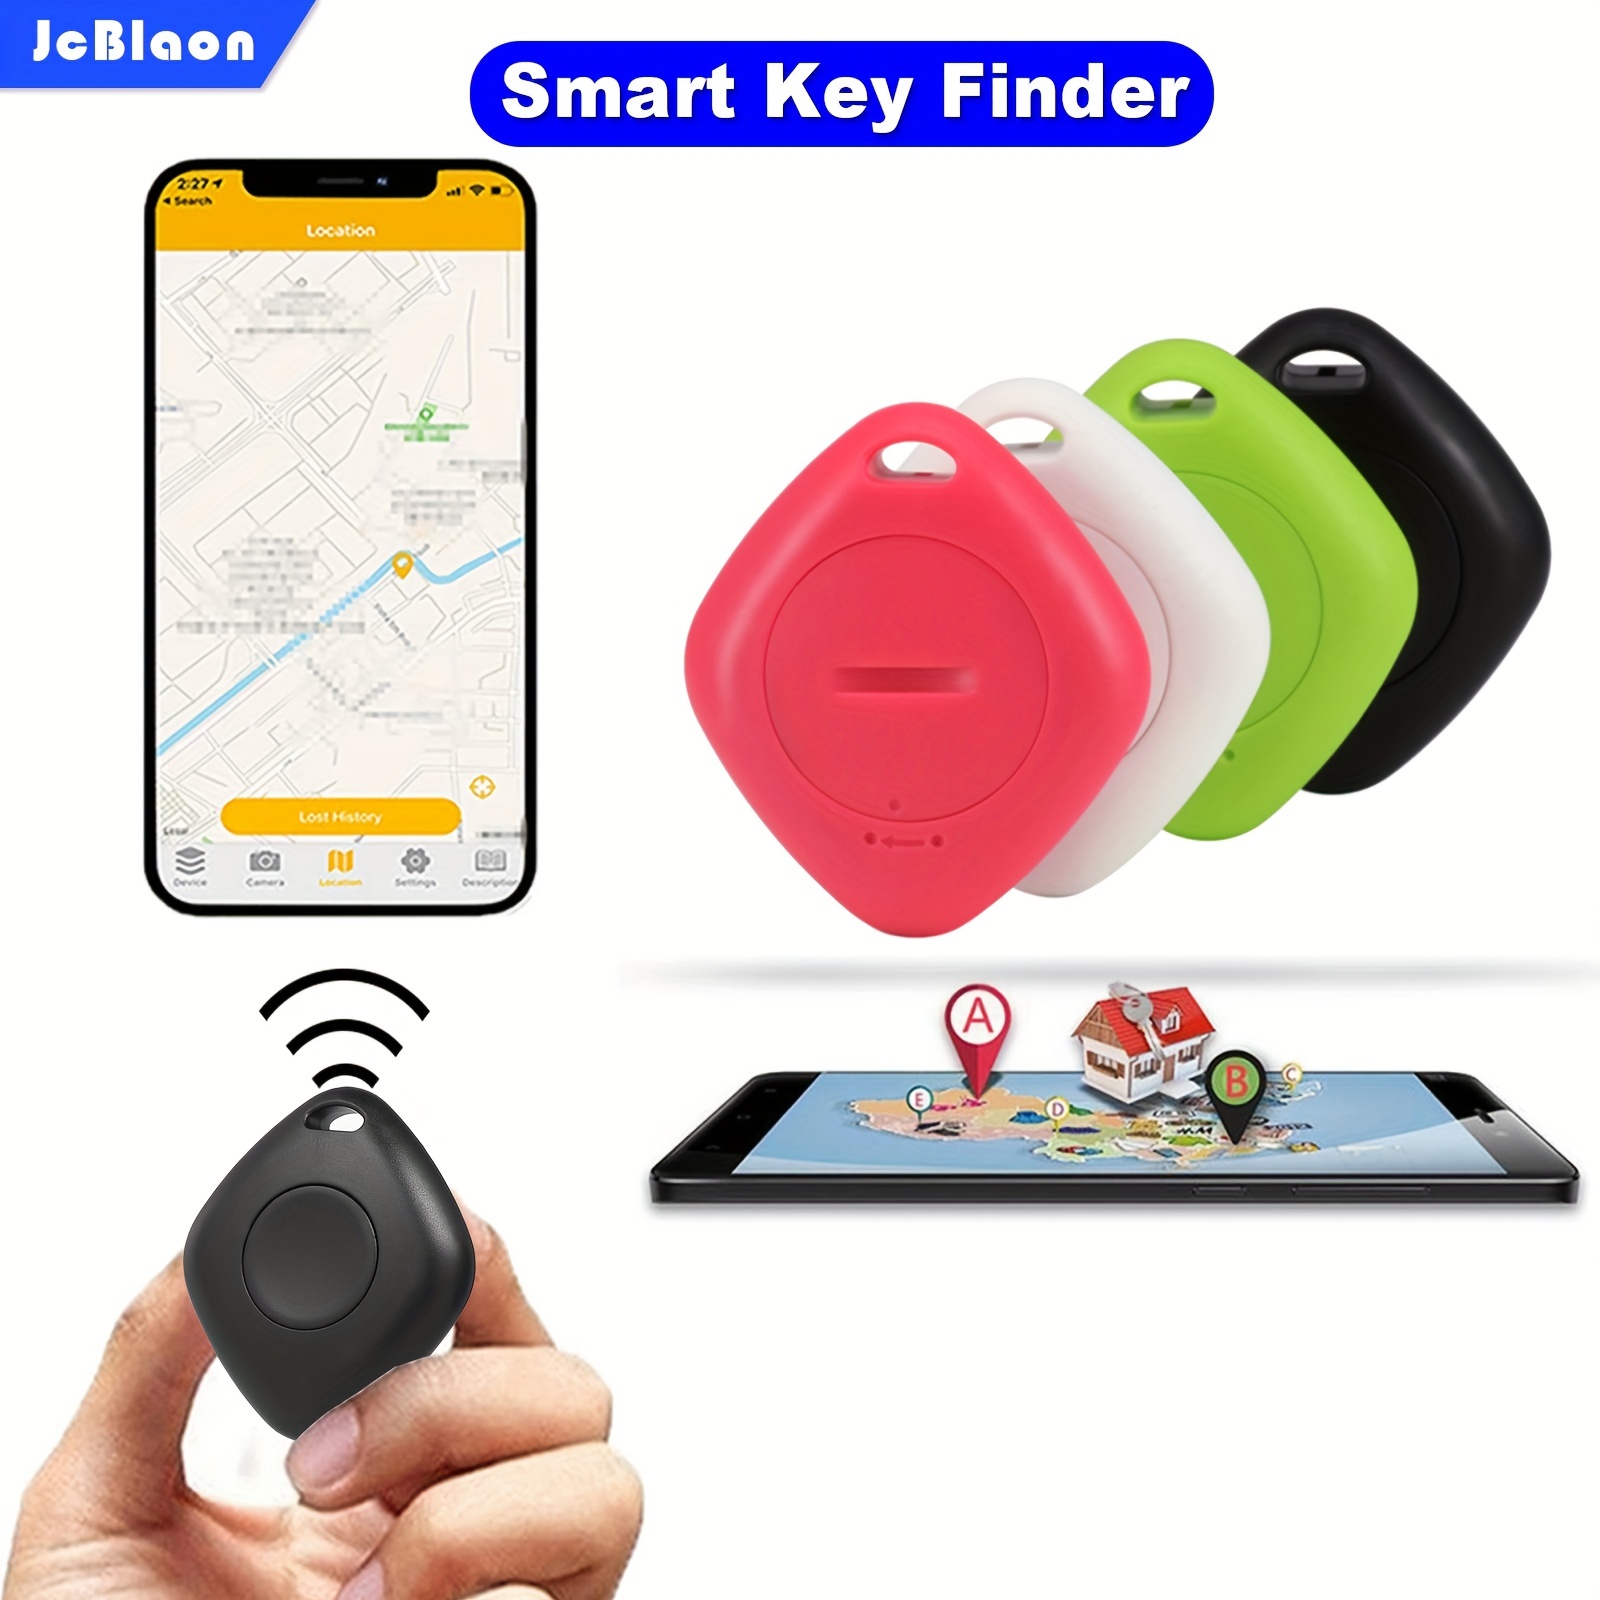 Esky Key Finder, Key Finders & Trackers 131ft Range Remote Finders with  Sound, Wireless Wallet Finders Locator Tag for Finding Key Remote Wallet